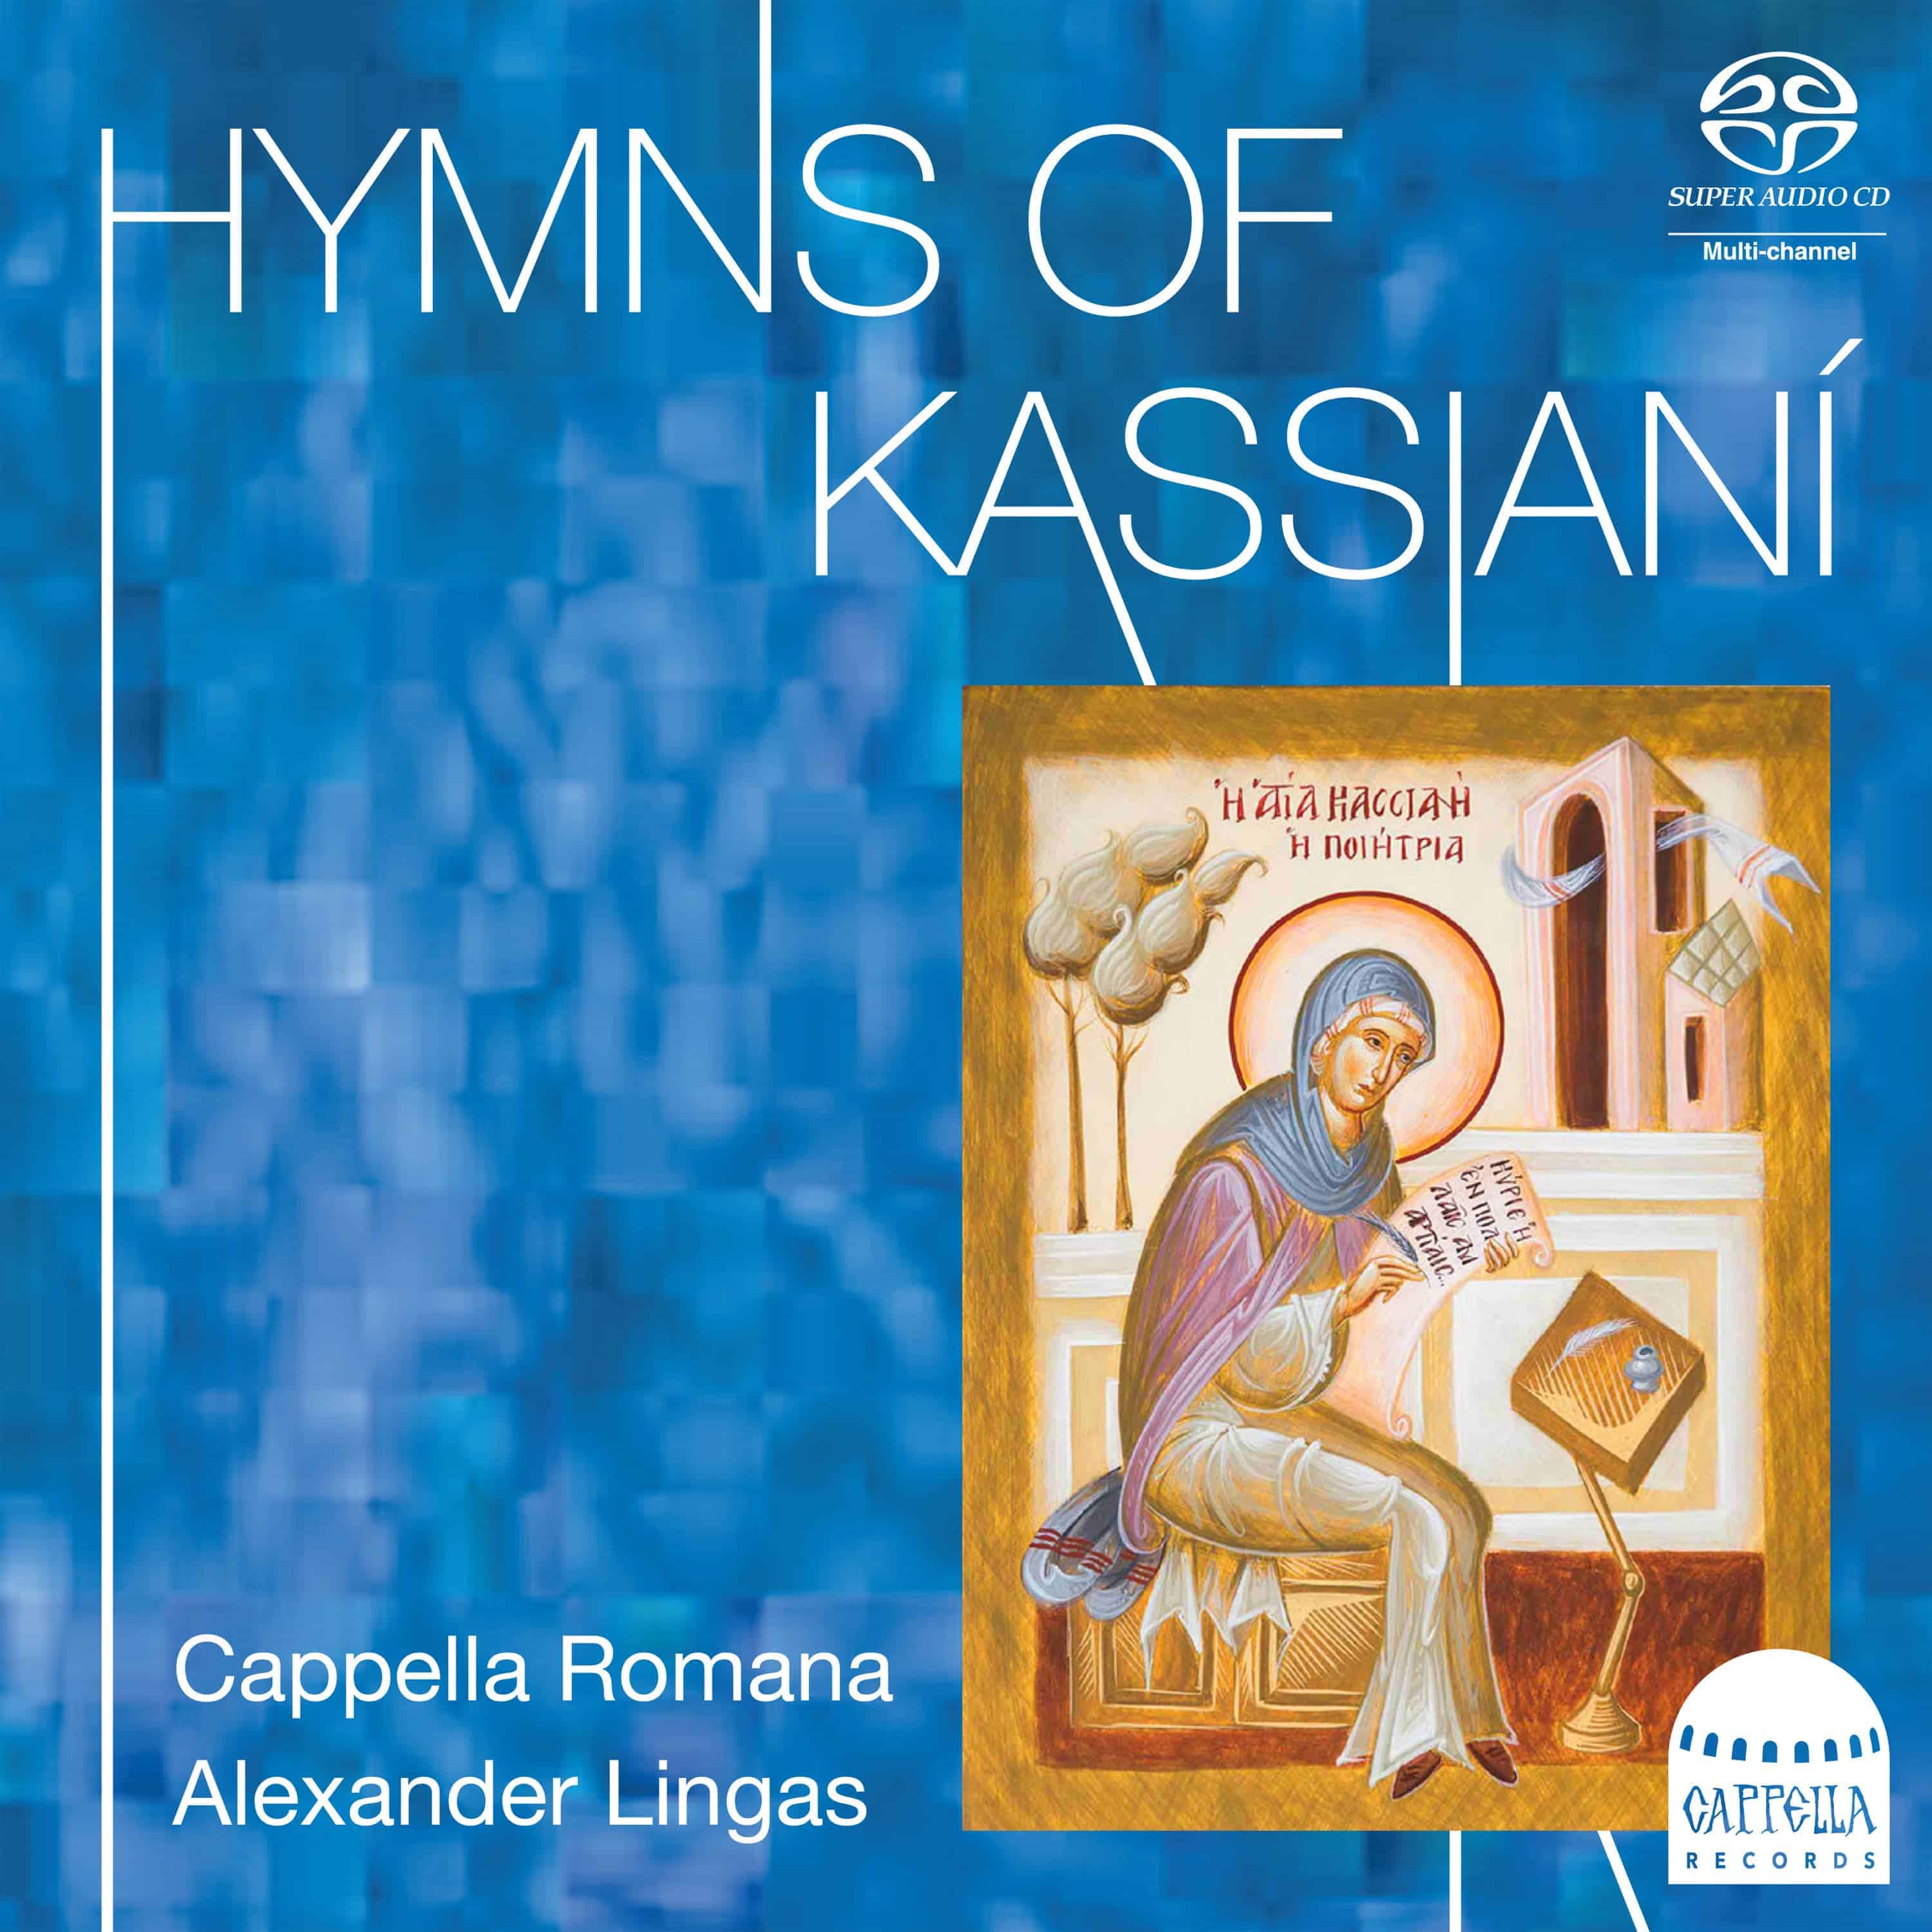 Classical-Modern Music Review For Hymns of Kassianí